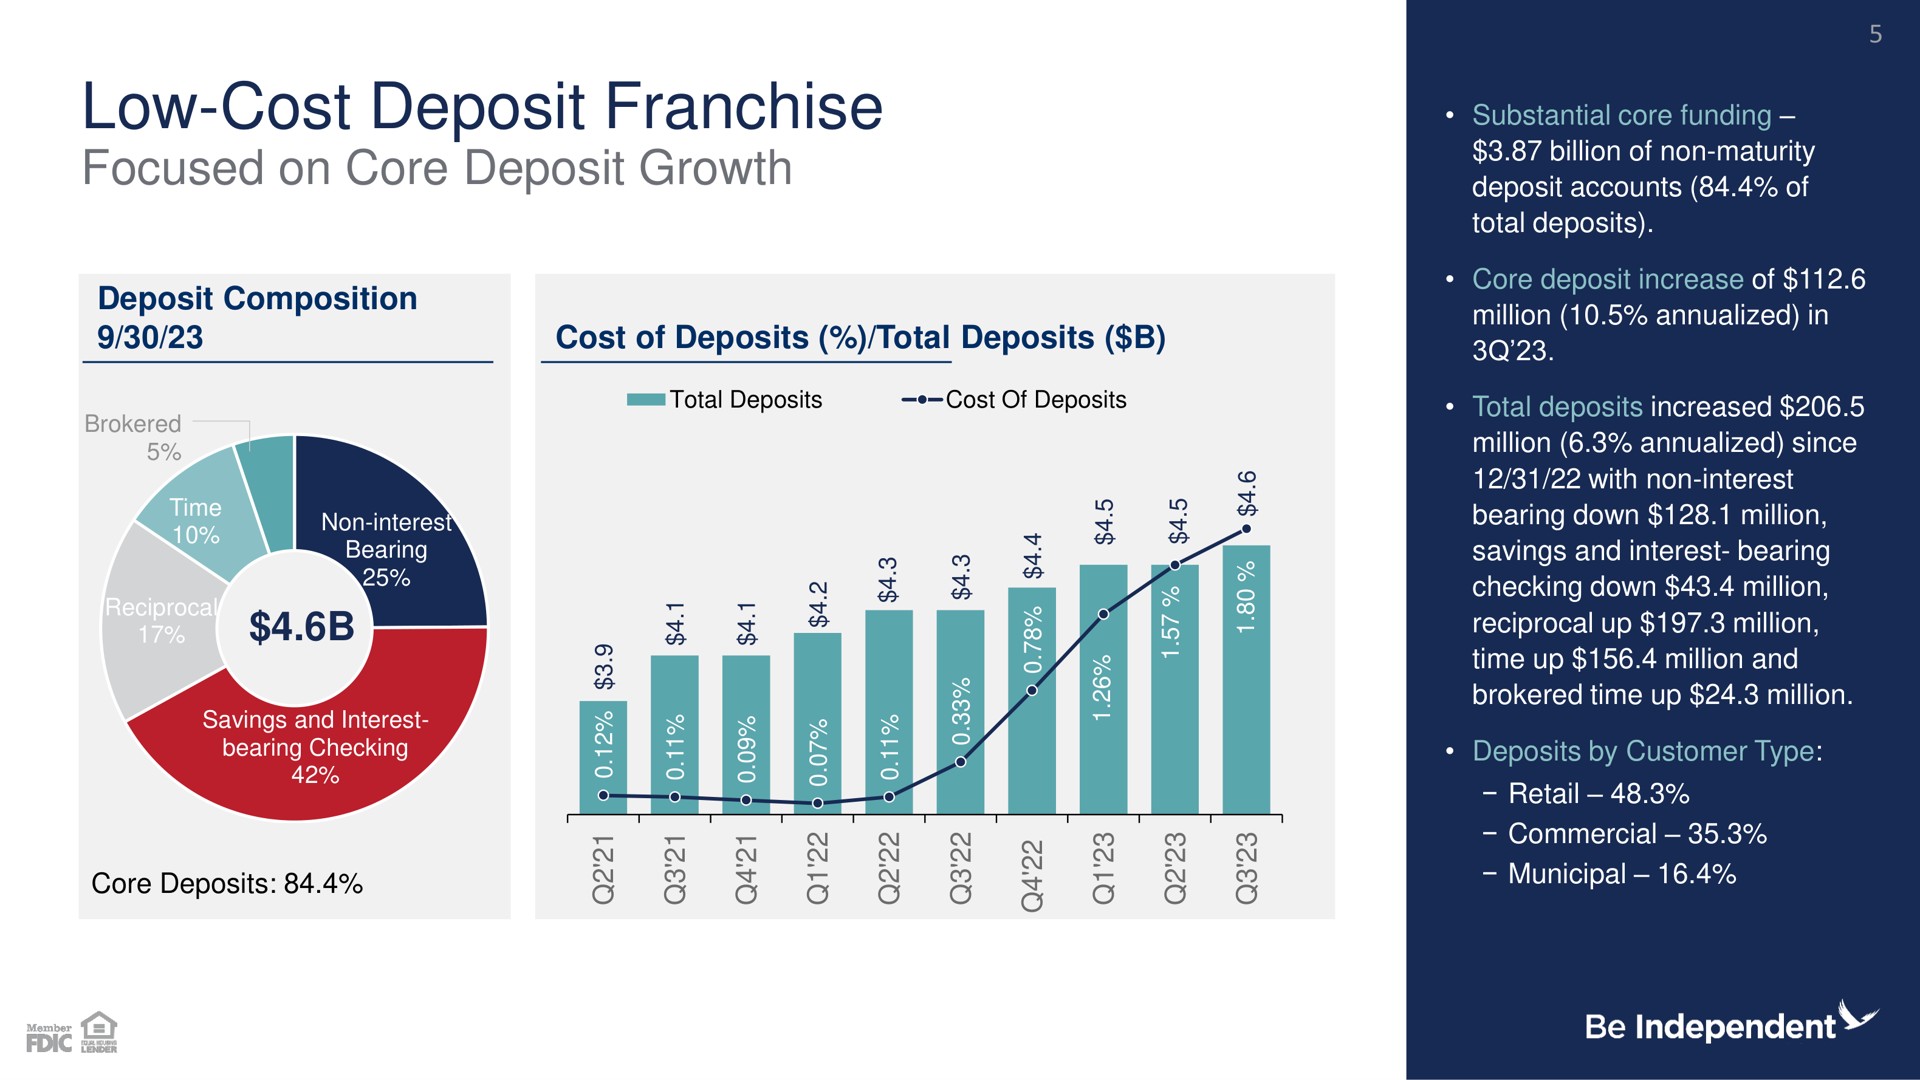 low cost deposit franchise focused on core deposit growth | Independent Bank Corp